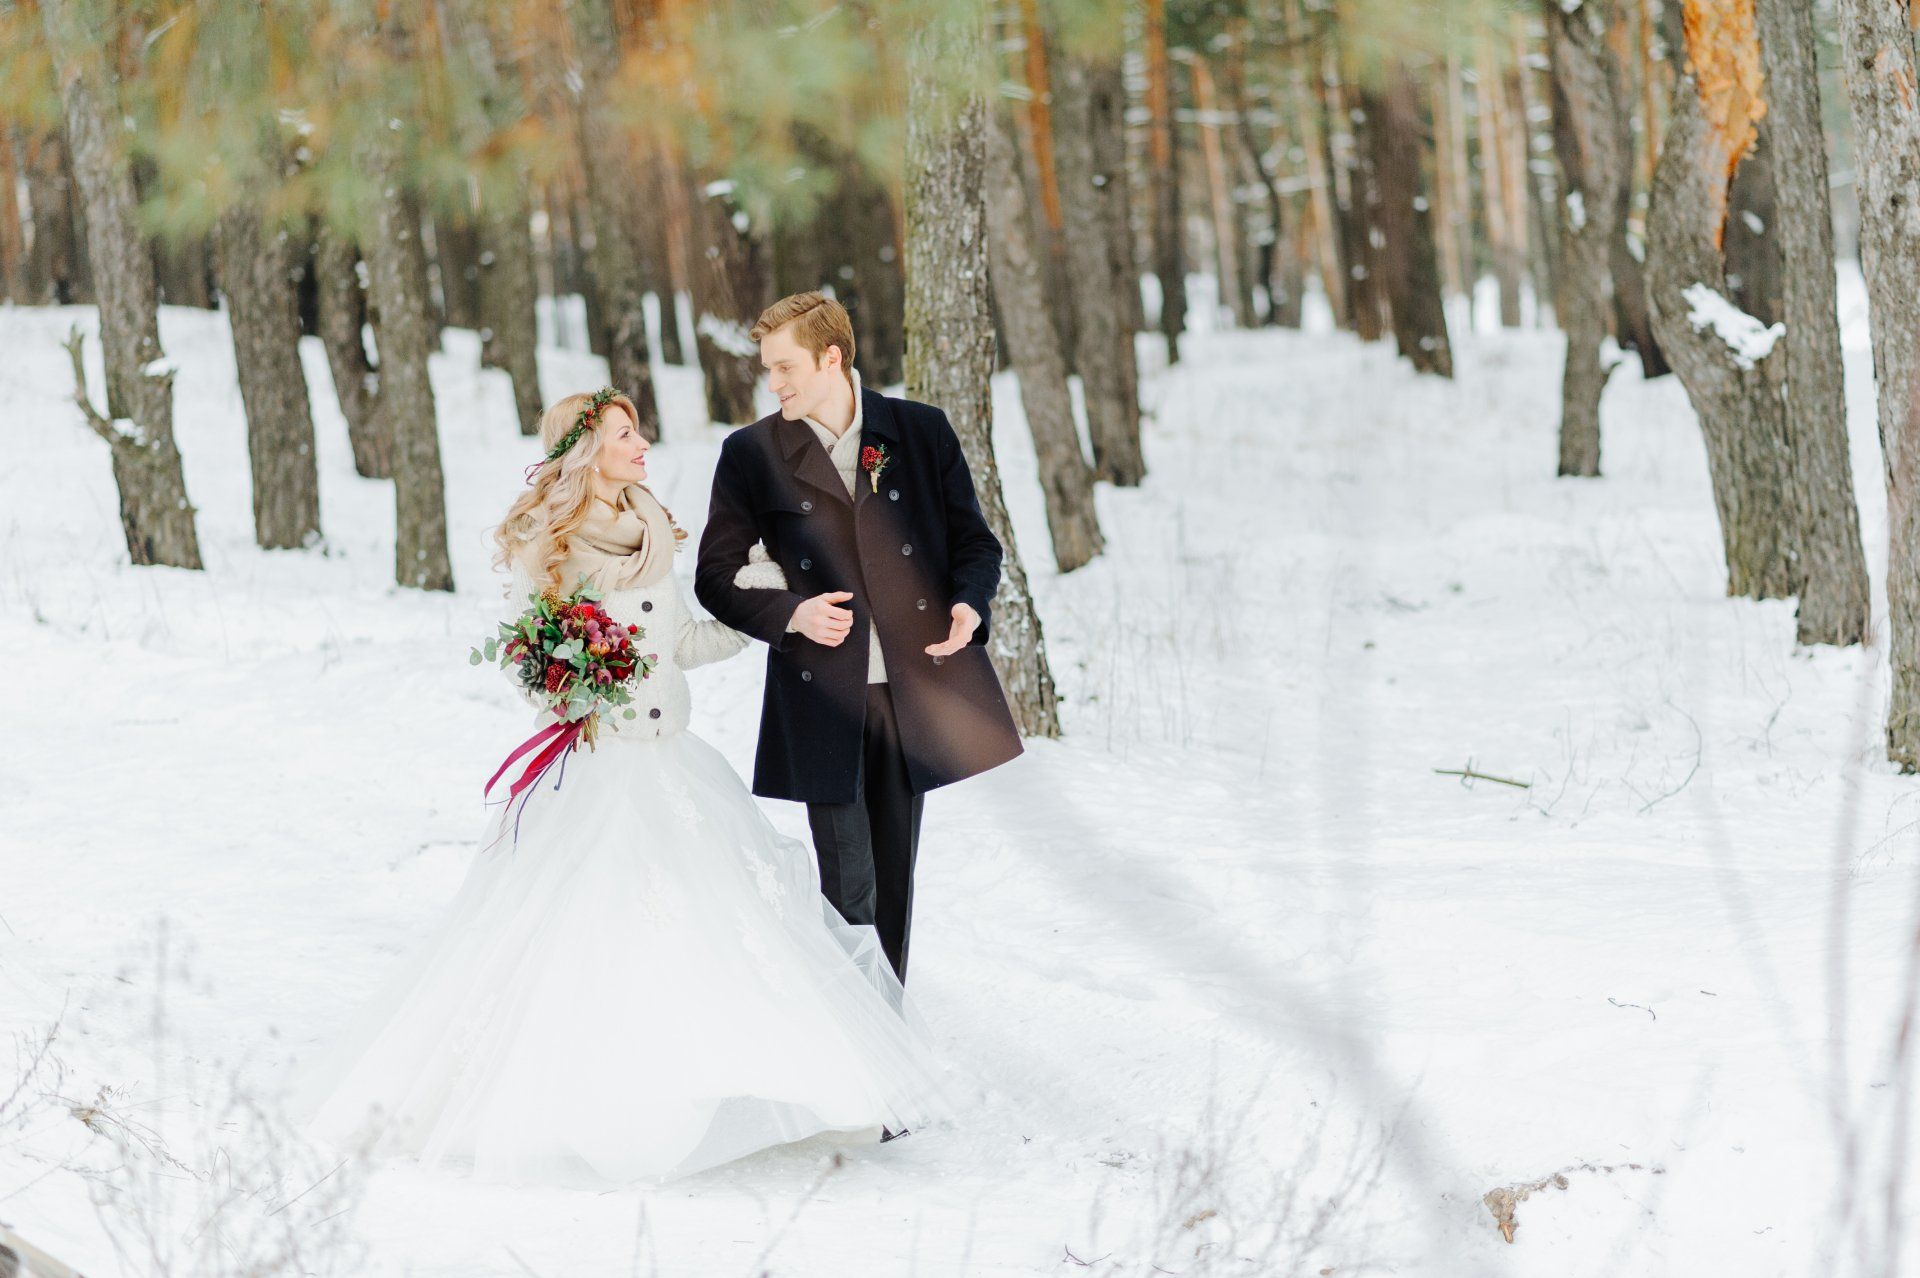 A bride and groom walk through a snow-covered forest wearing coats